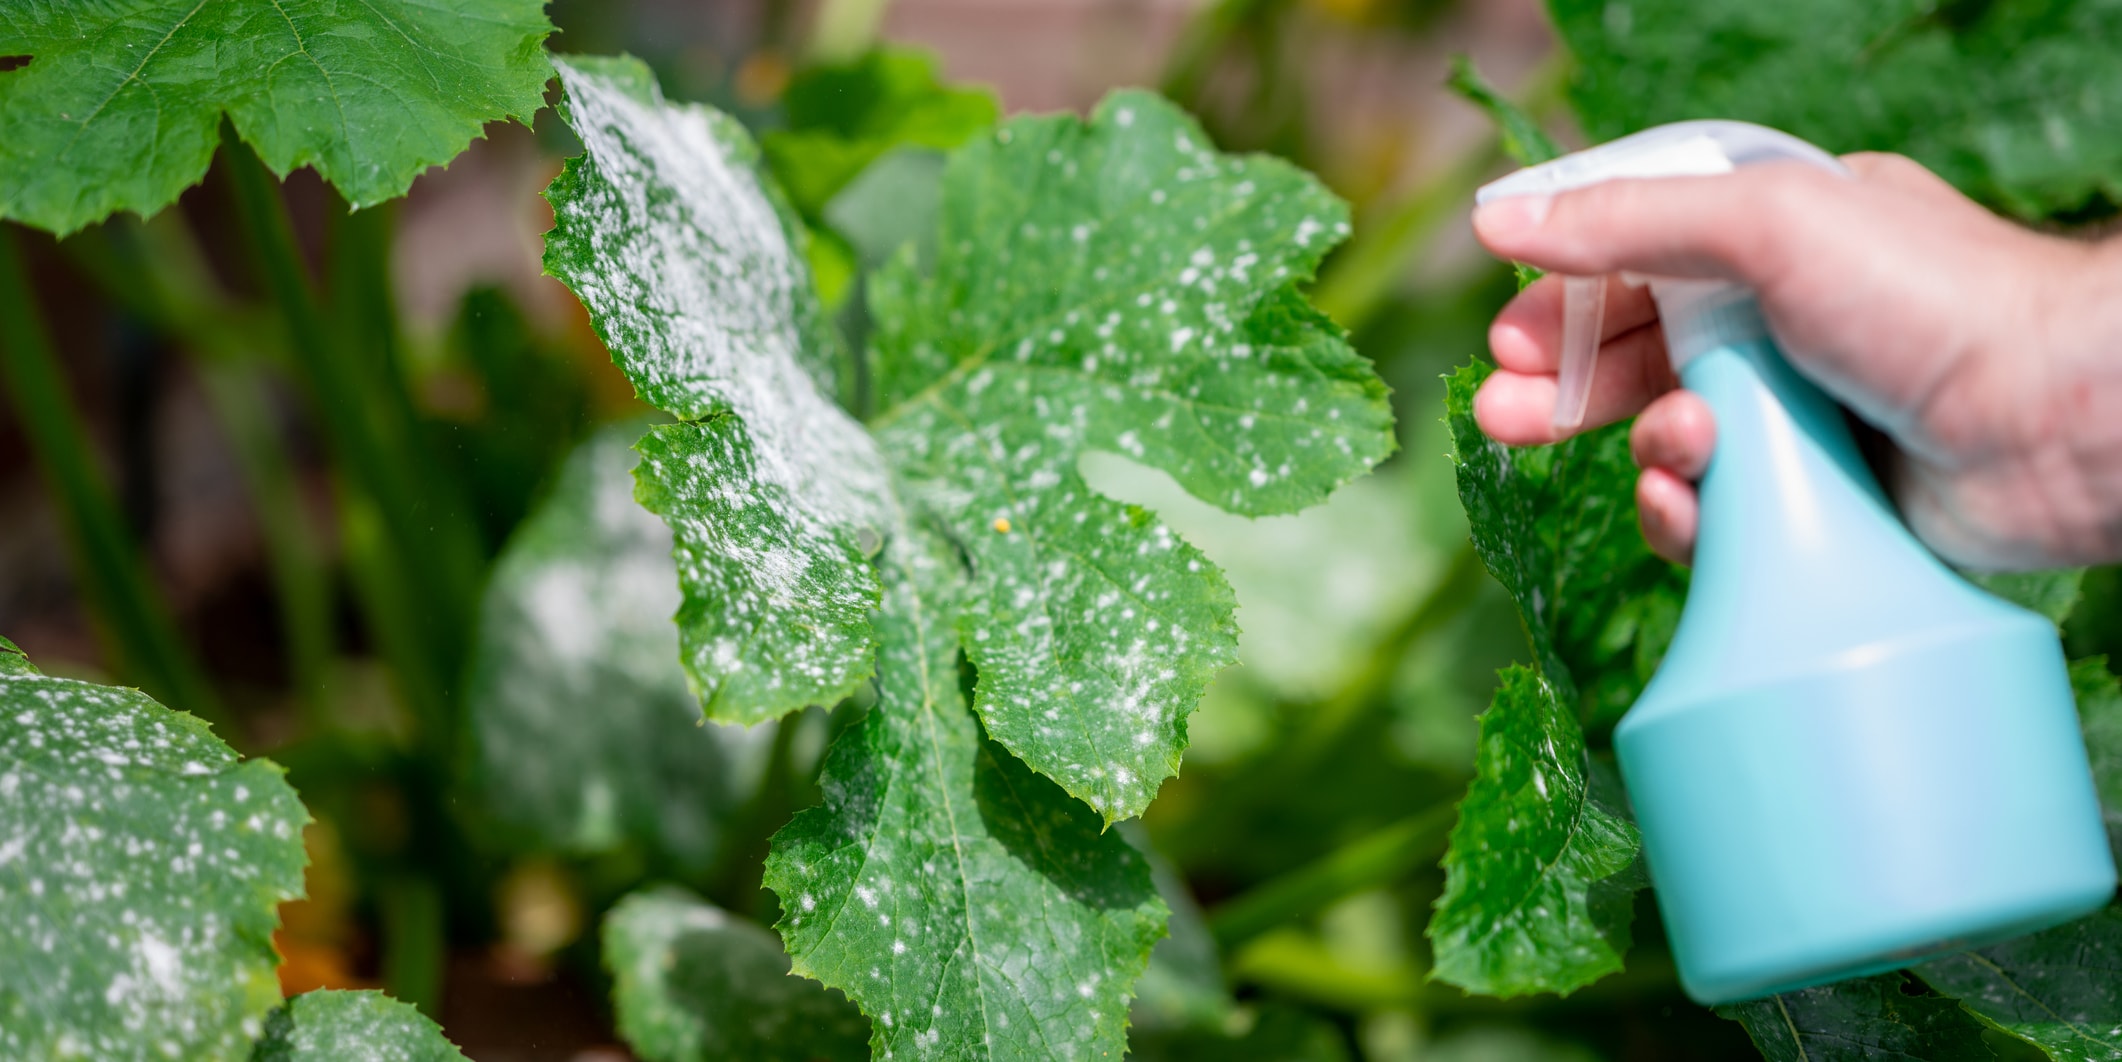 wage war on powdery mildew - top tips and natural treatments